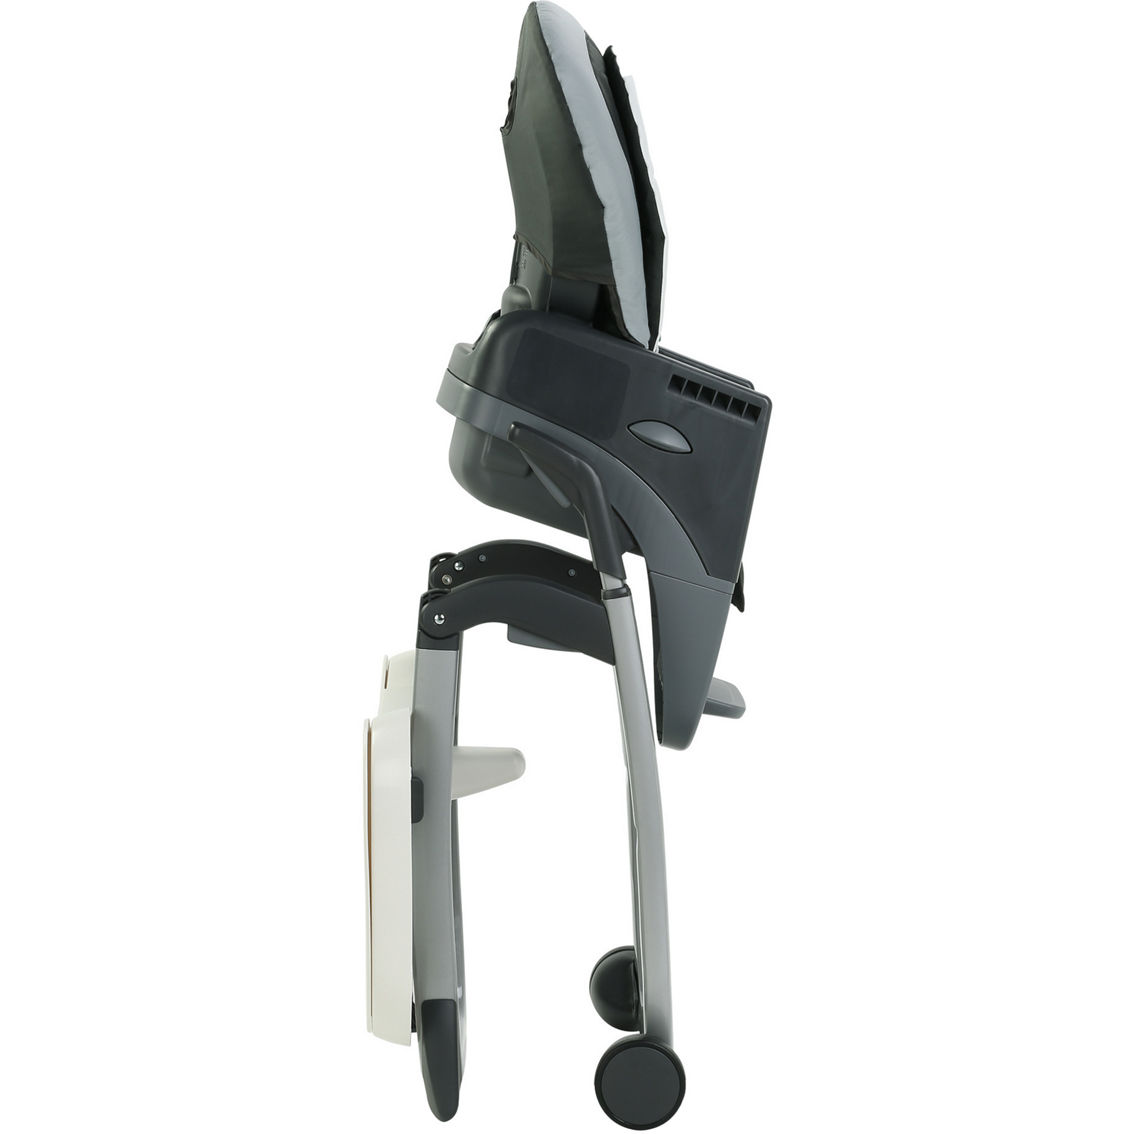 Graco DuoDiner DLX 6 in 1 Highchair - Image 3 of 5